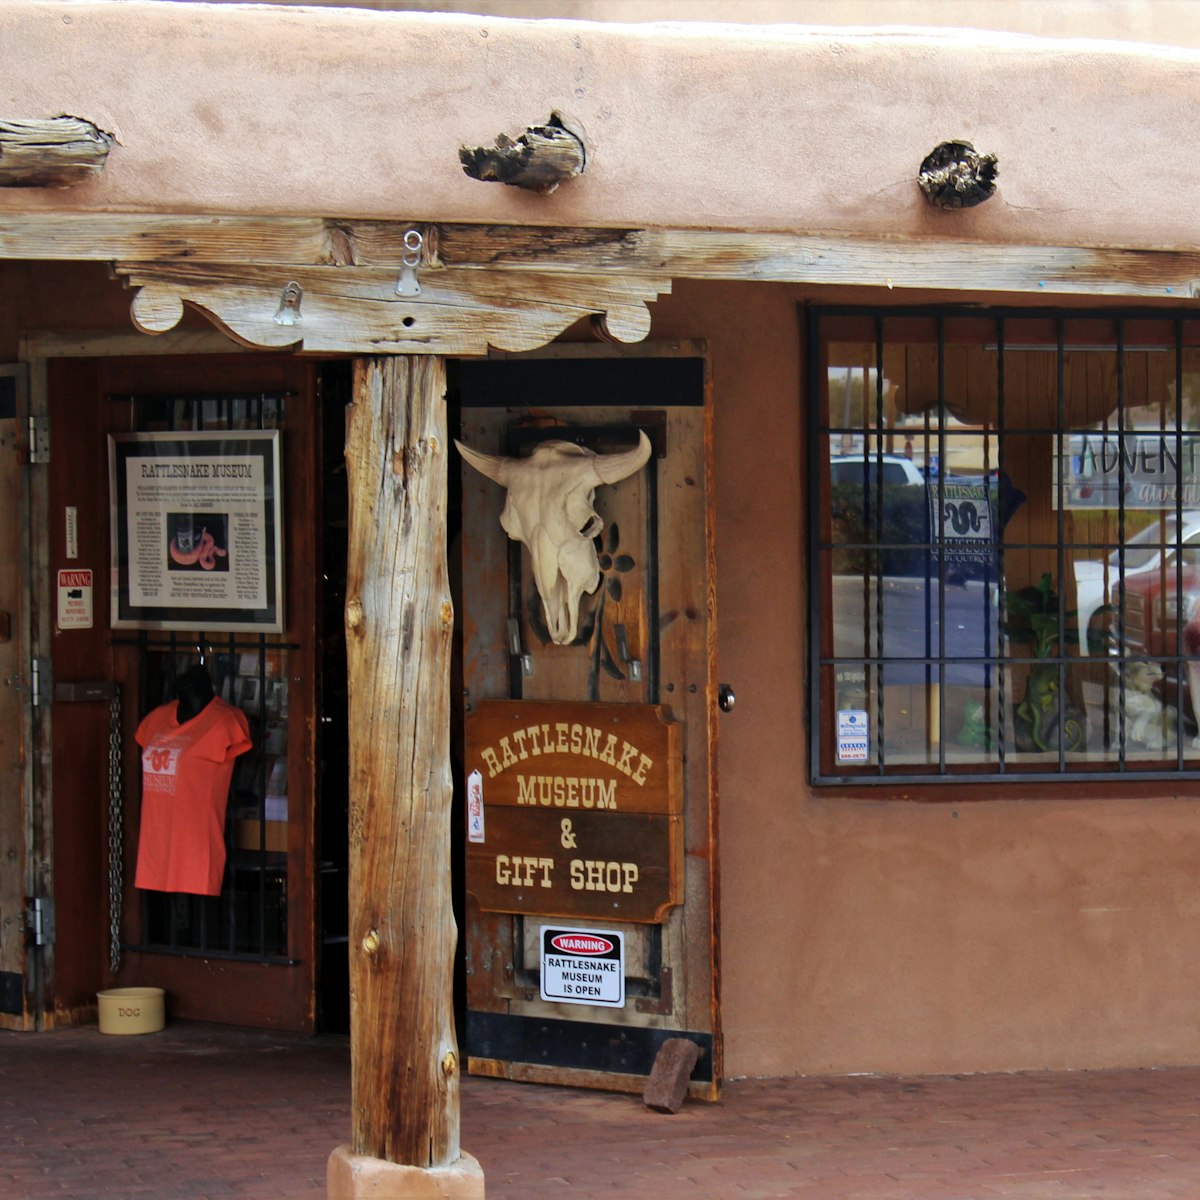 Albuquerque, New Mexico, USA - August 2, 2016: Exterior of American International Rattlesnake Museum, Old Town Albuquerque.